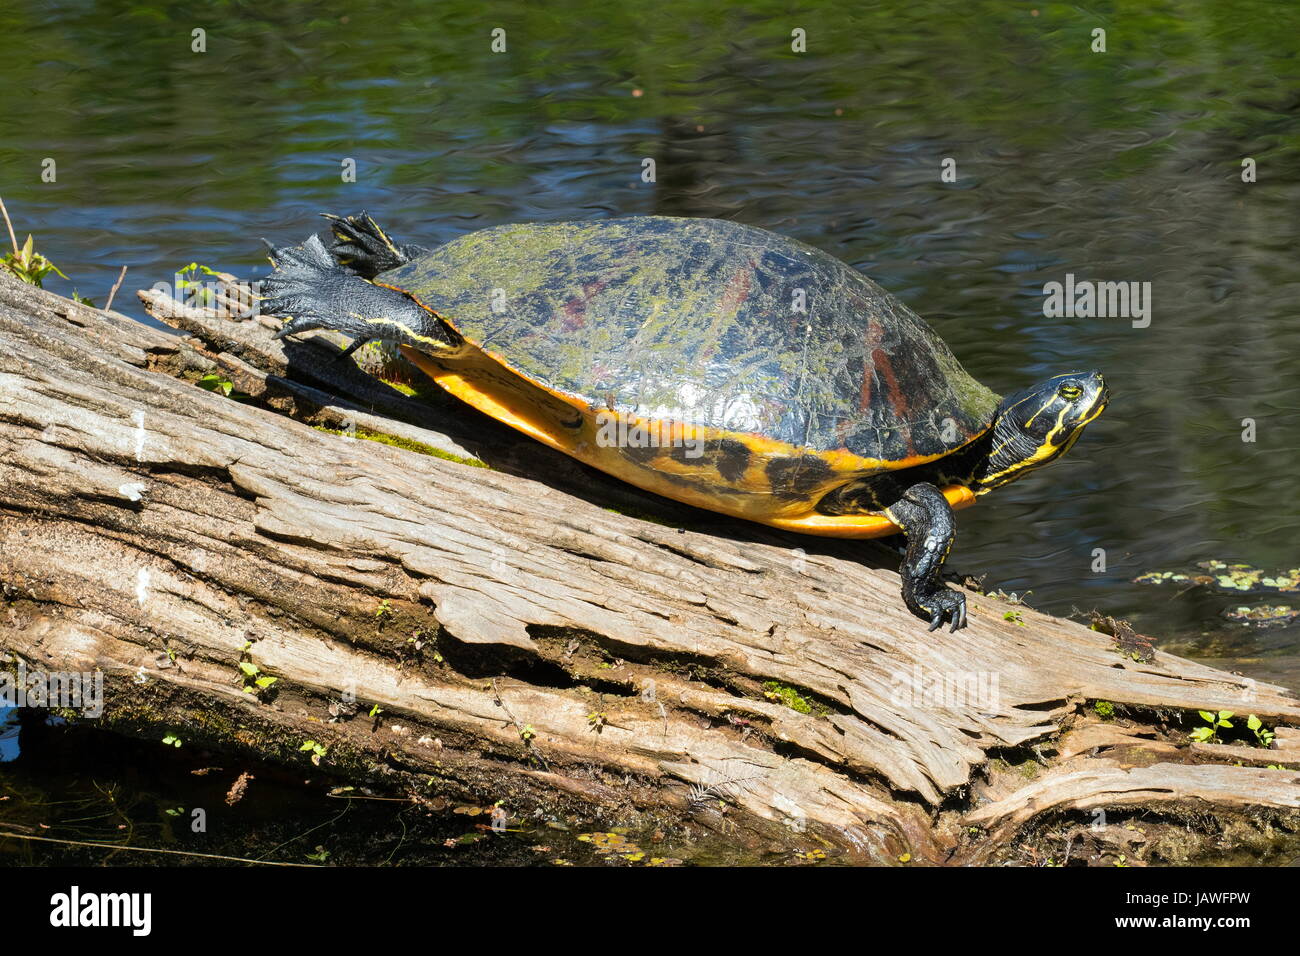 A Florida red bellied cooter, Pseudemys nelsoni, on a log. Stock Photo